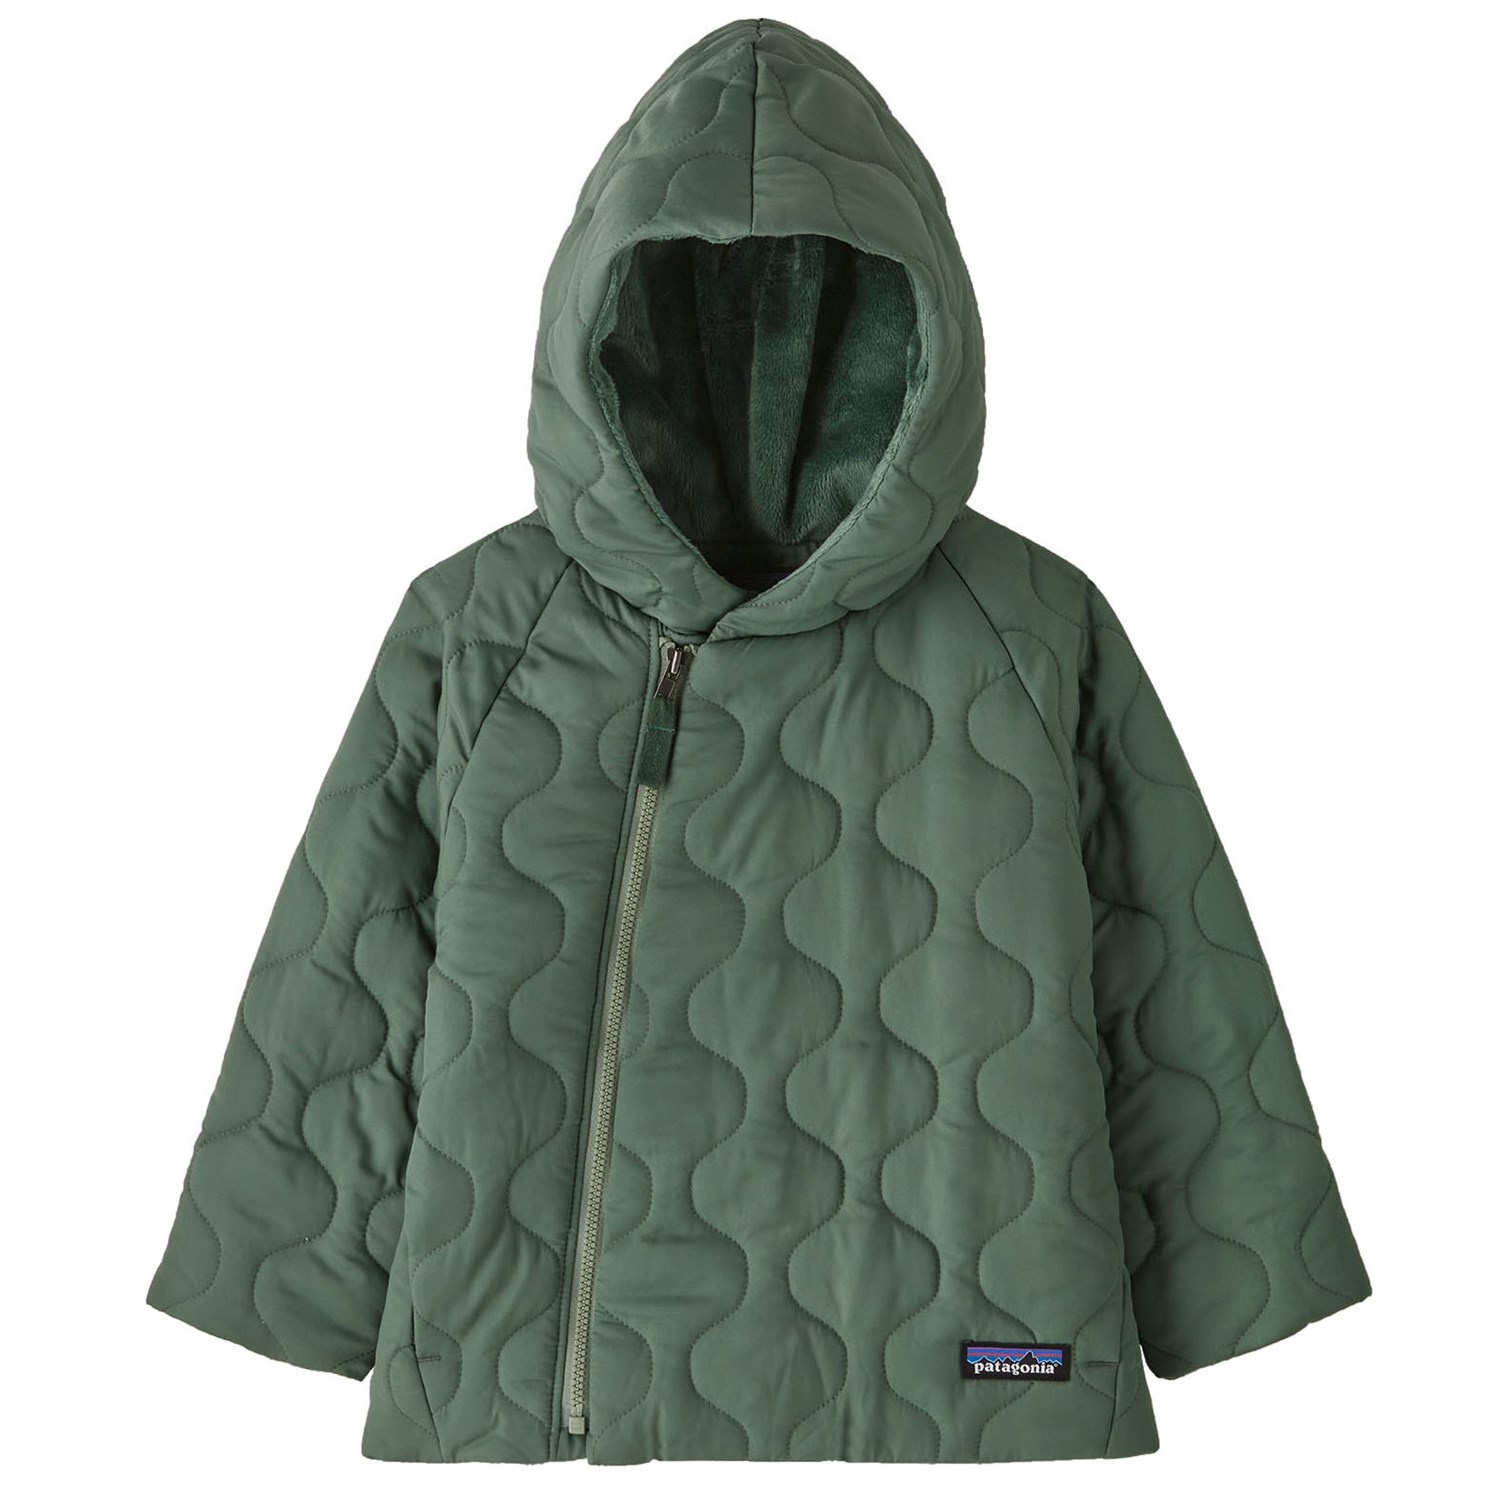 Куртка Patagonia Quilted Puff, цвет Hemlock Green куртка patagonia quilted puff цвет planet pink